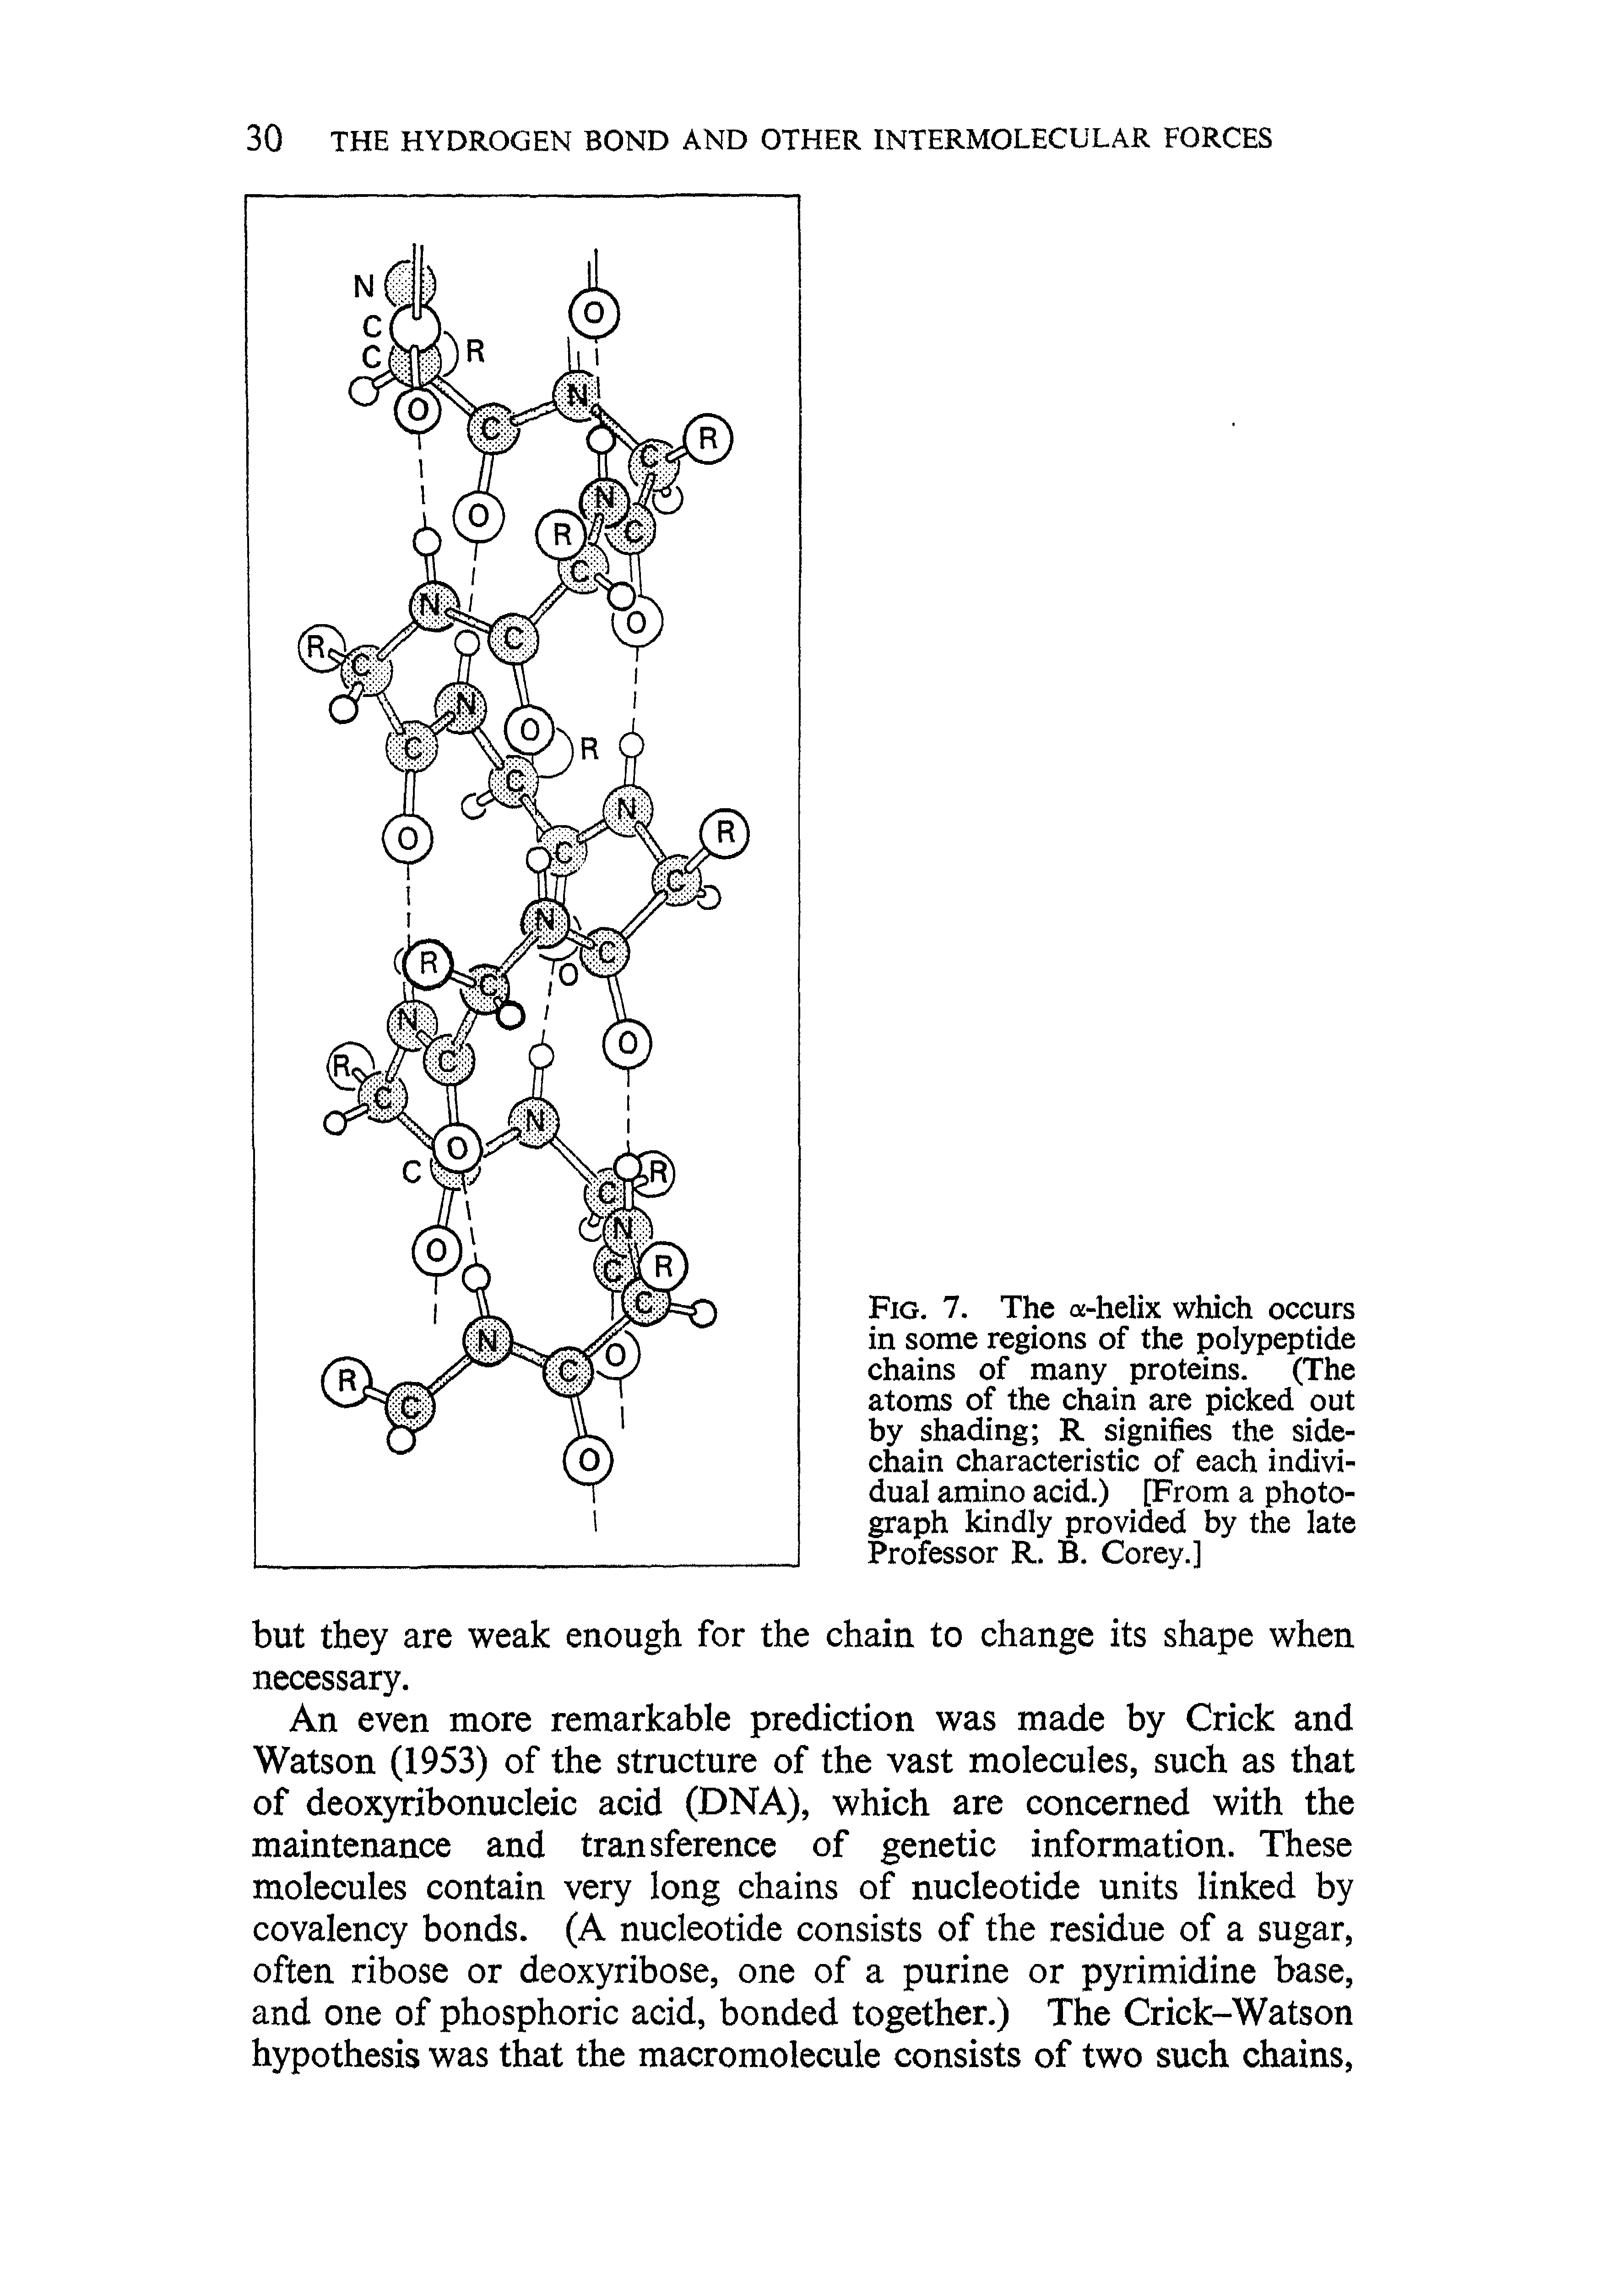 Fig. 7. The a-helix which occurs in some regions of the polypeptide chains of many proteins. (The atoms of the chain are picked out by shading R signifies the side-chain characteristic of each individual amino acid.) [From a photograph kindly provided by the late Professor R. B. Corey.]...